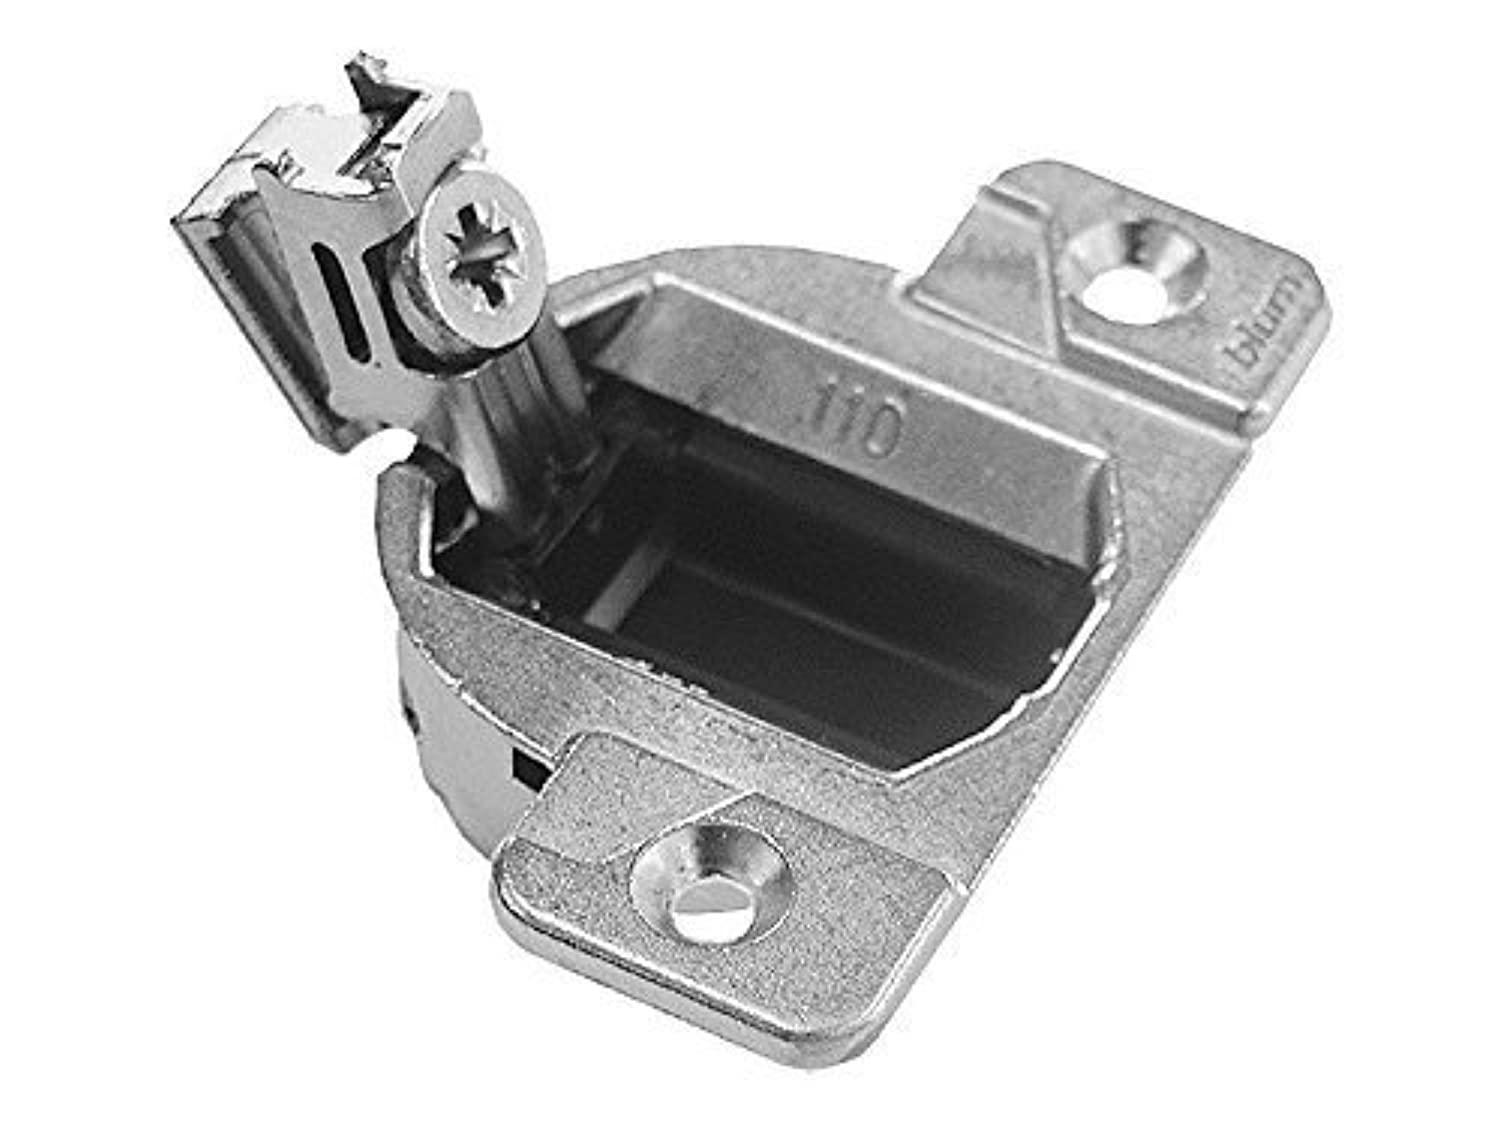 blum 33.3600 compact 33 screw on 110 degree opening face frame hinge, zinc die-cast (pack of 10)